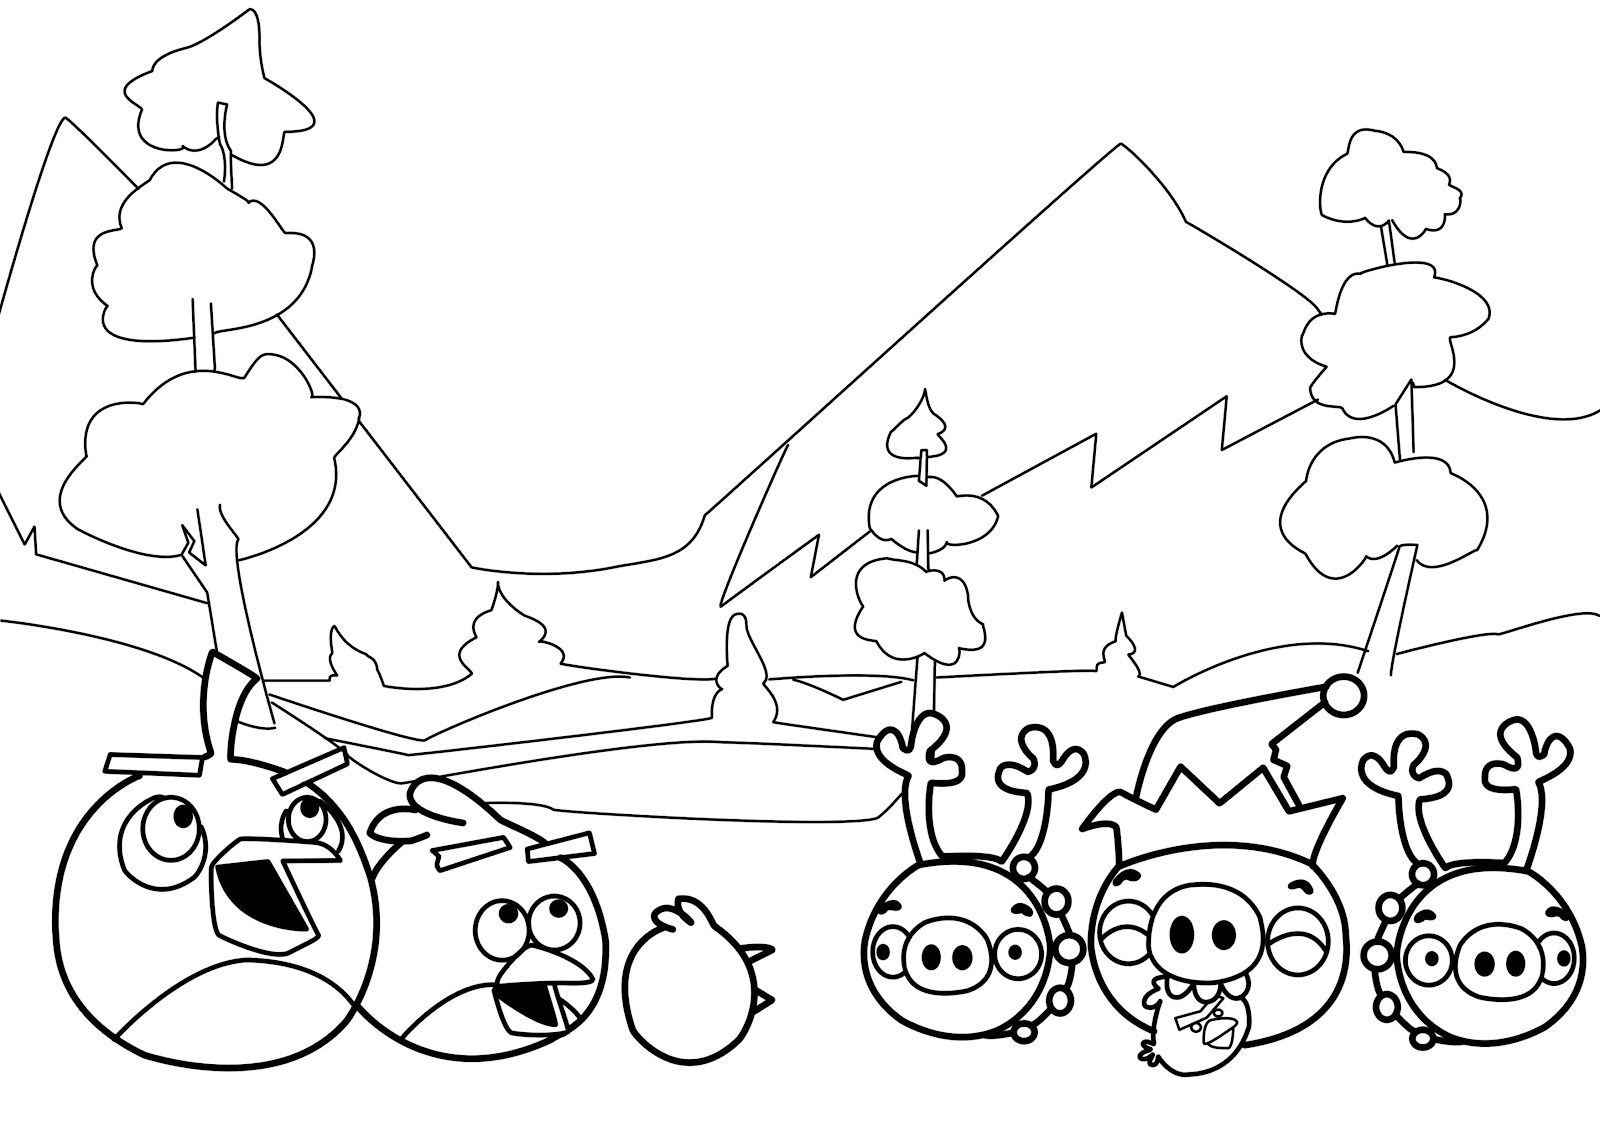 Winter New Angry Birds Coloring Pages | Coloring Page For Kids and Adults